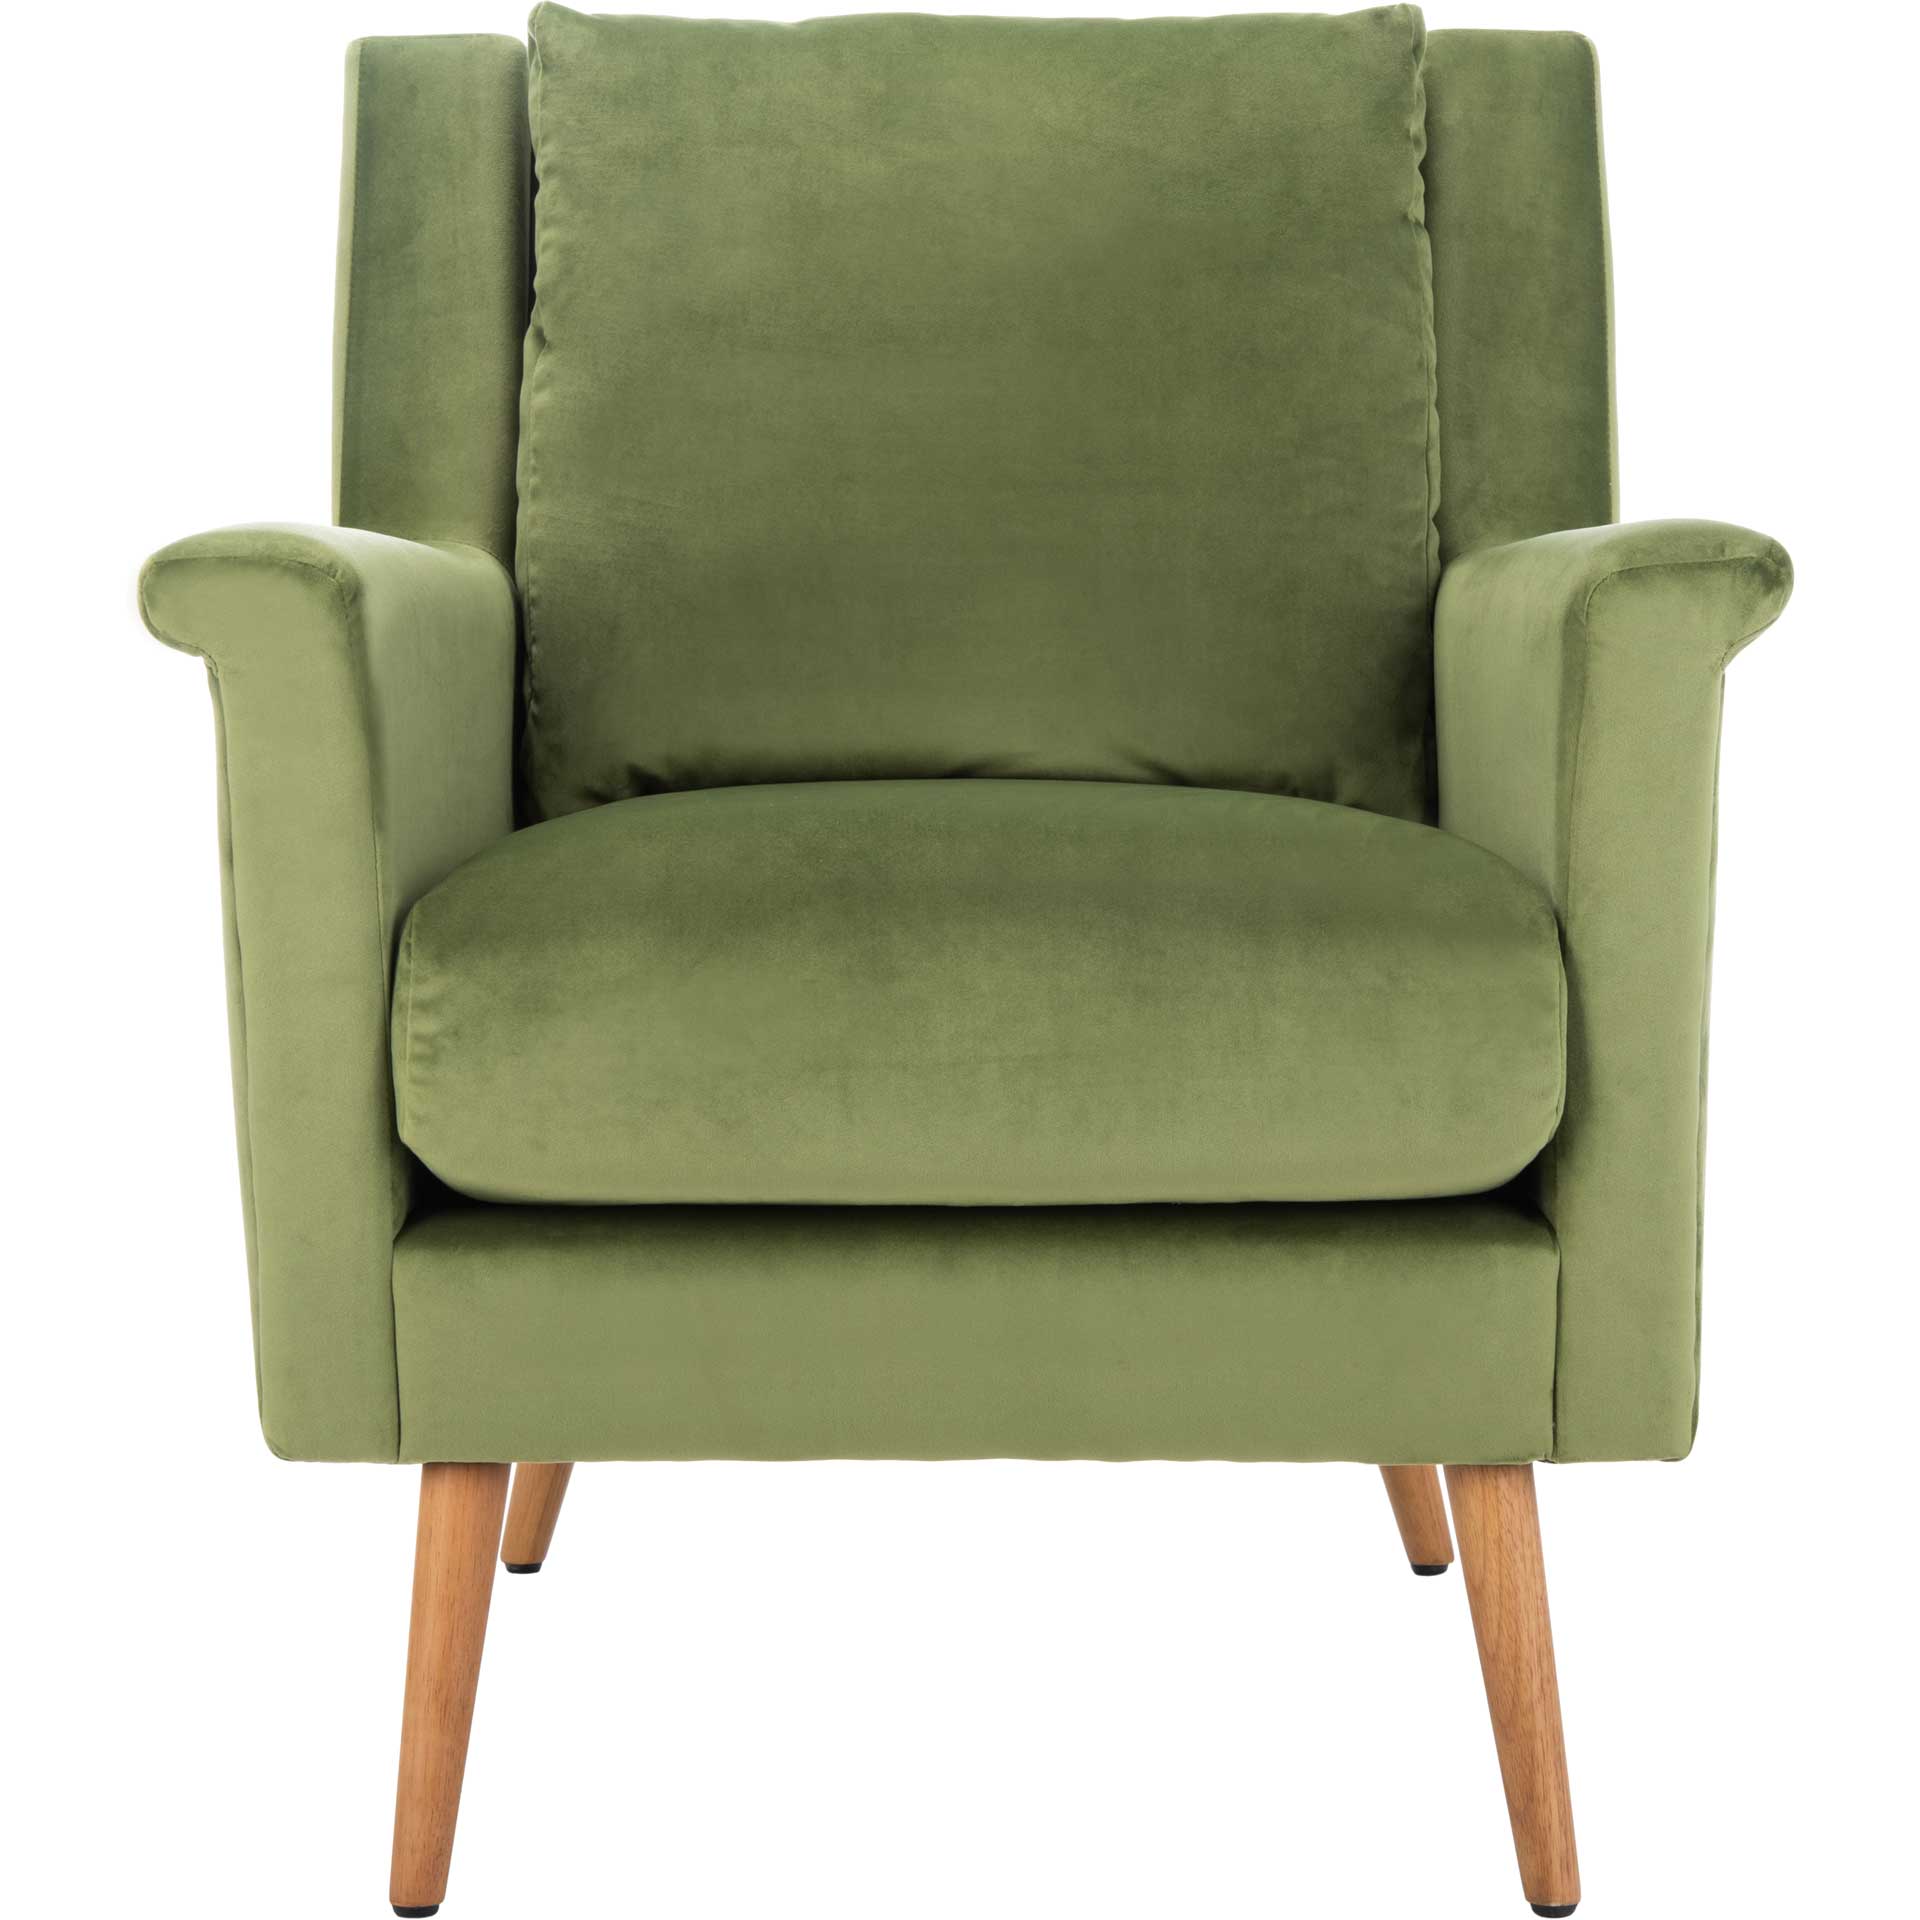 Aspen Mid Century Arm Chair Olive/Natural